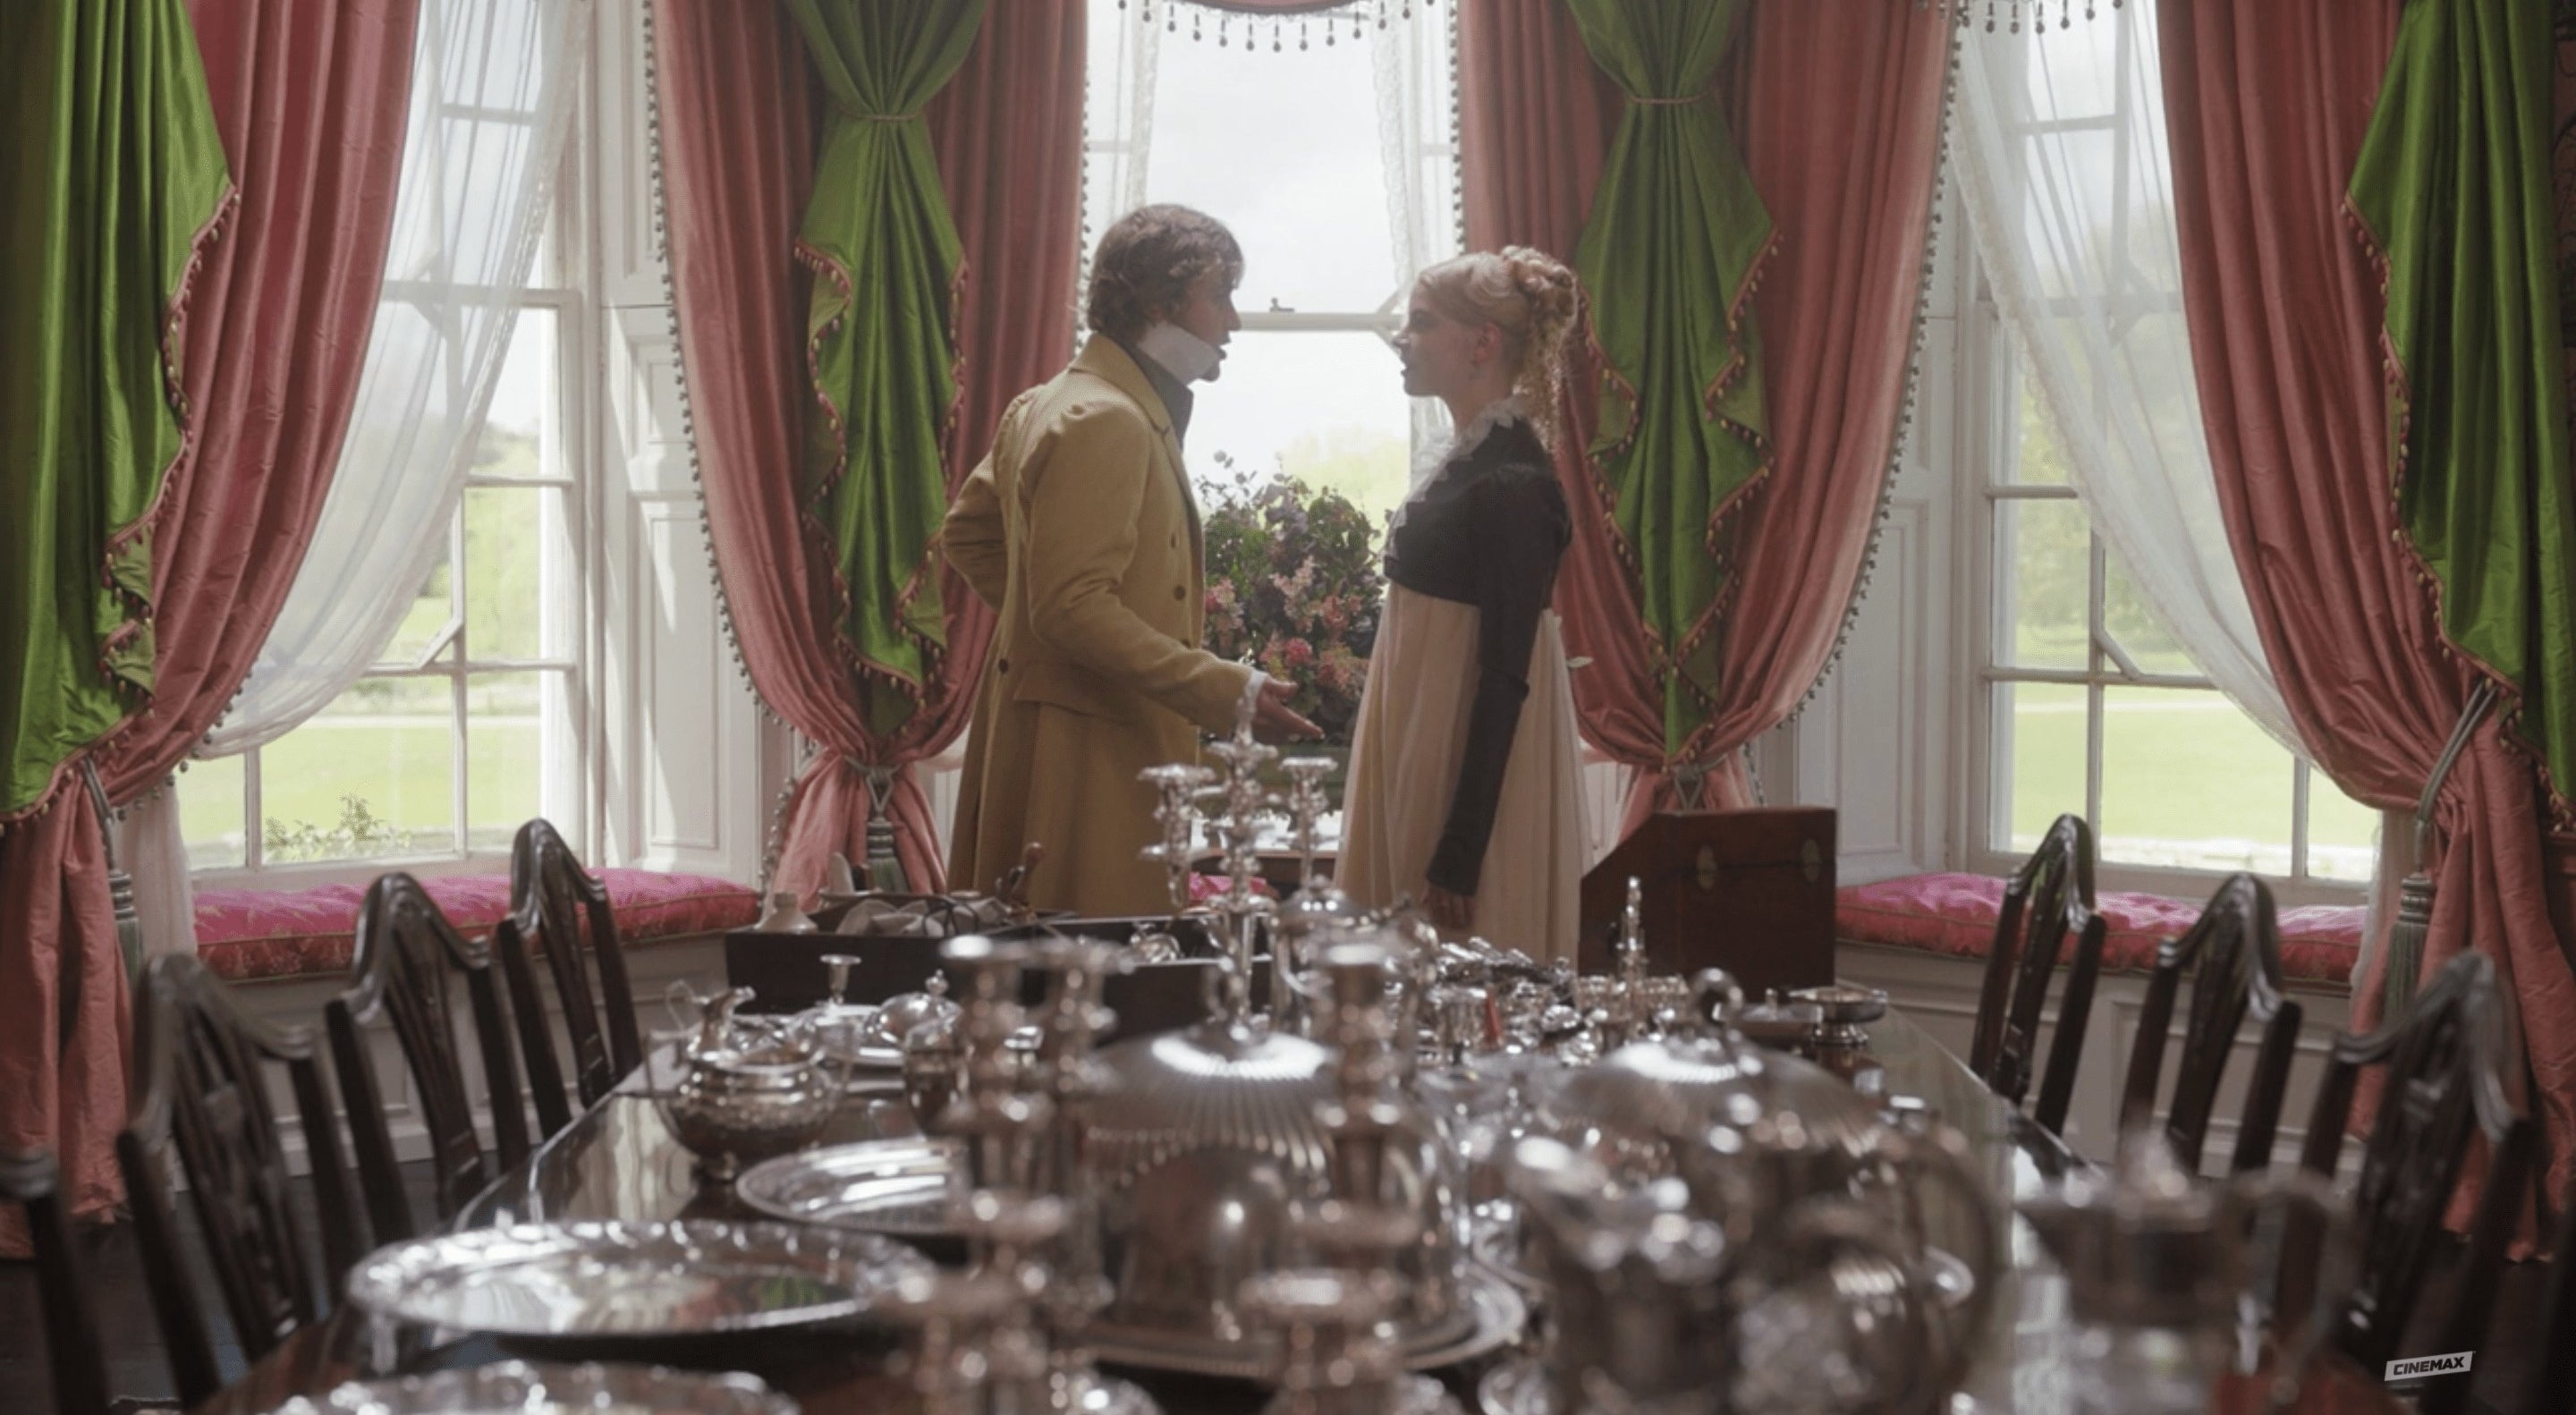 Emma and Knightley argue in the dining room